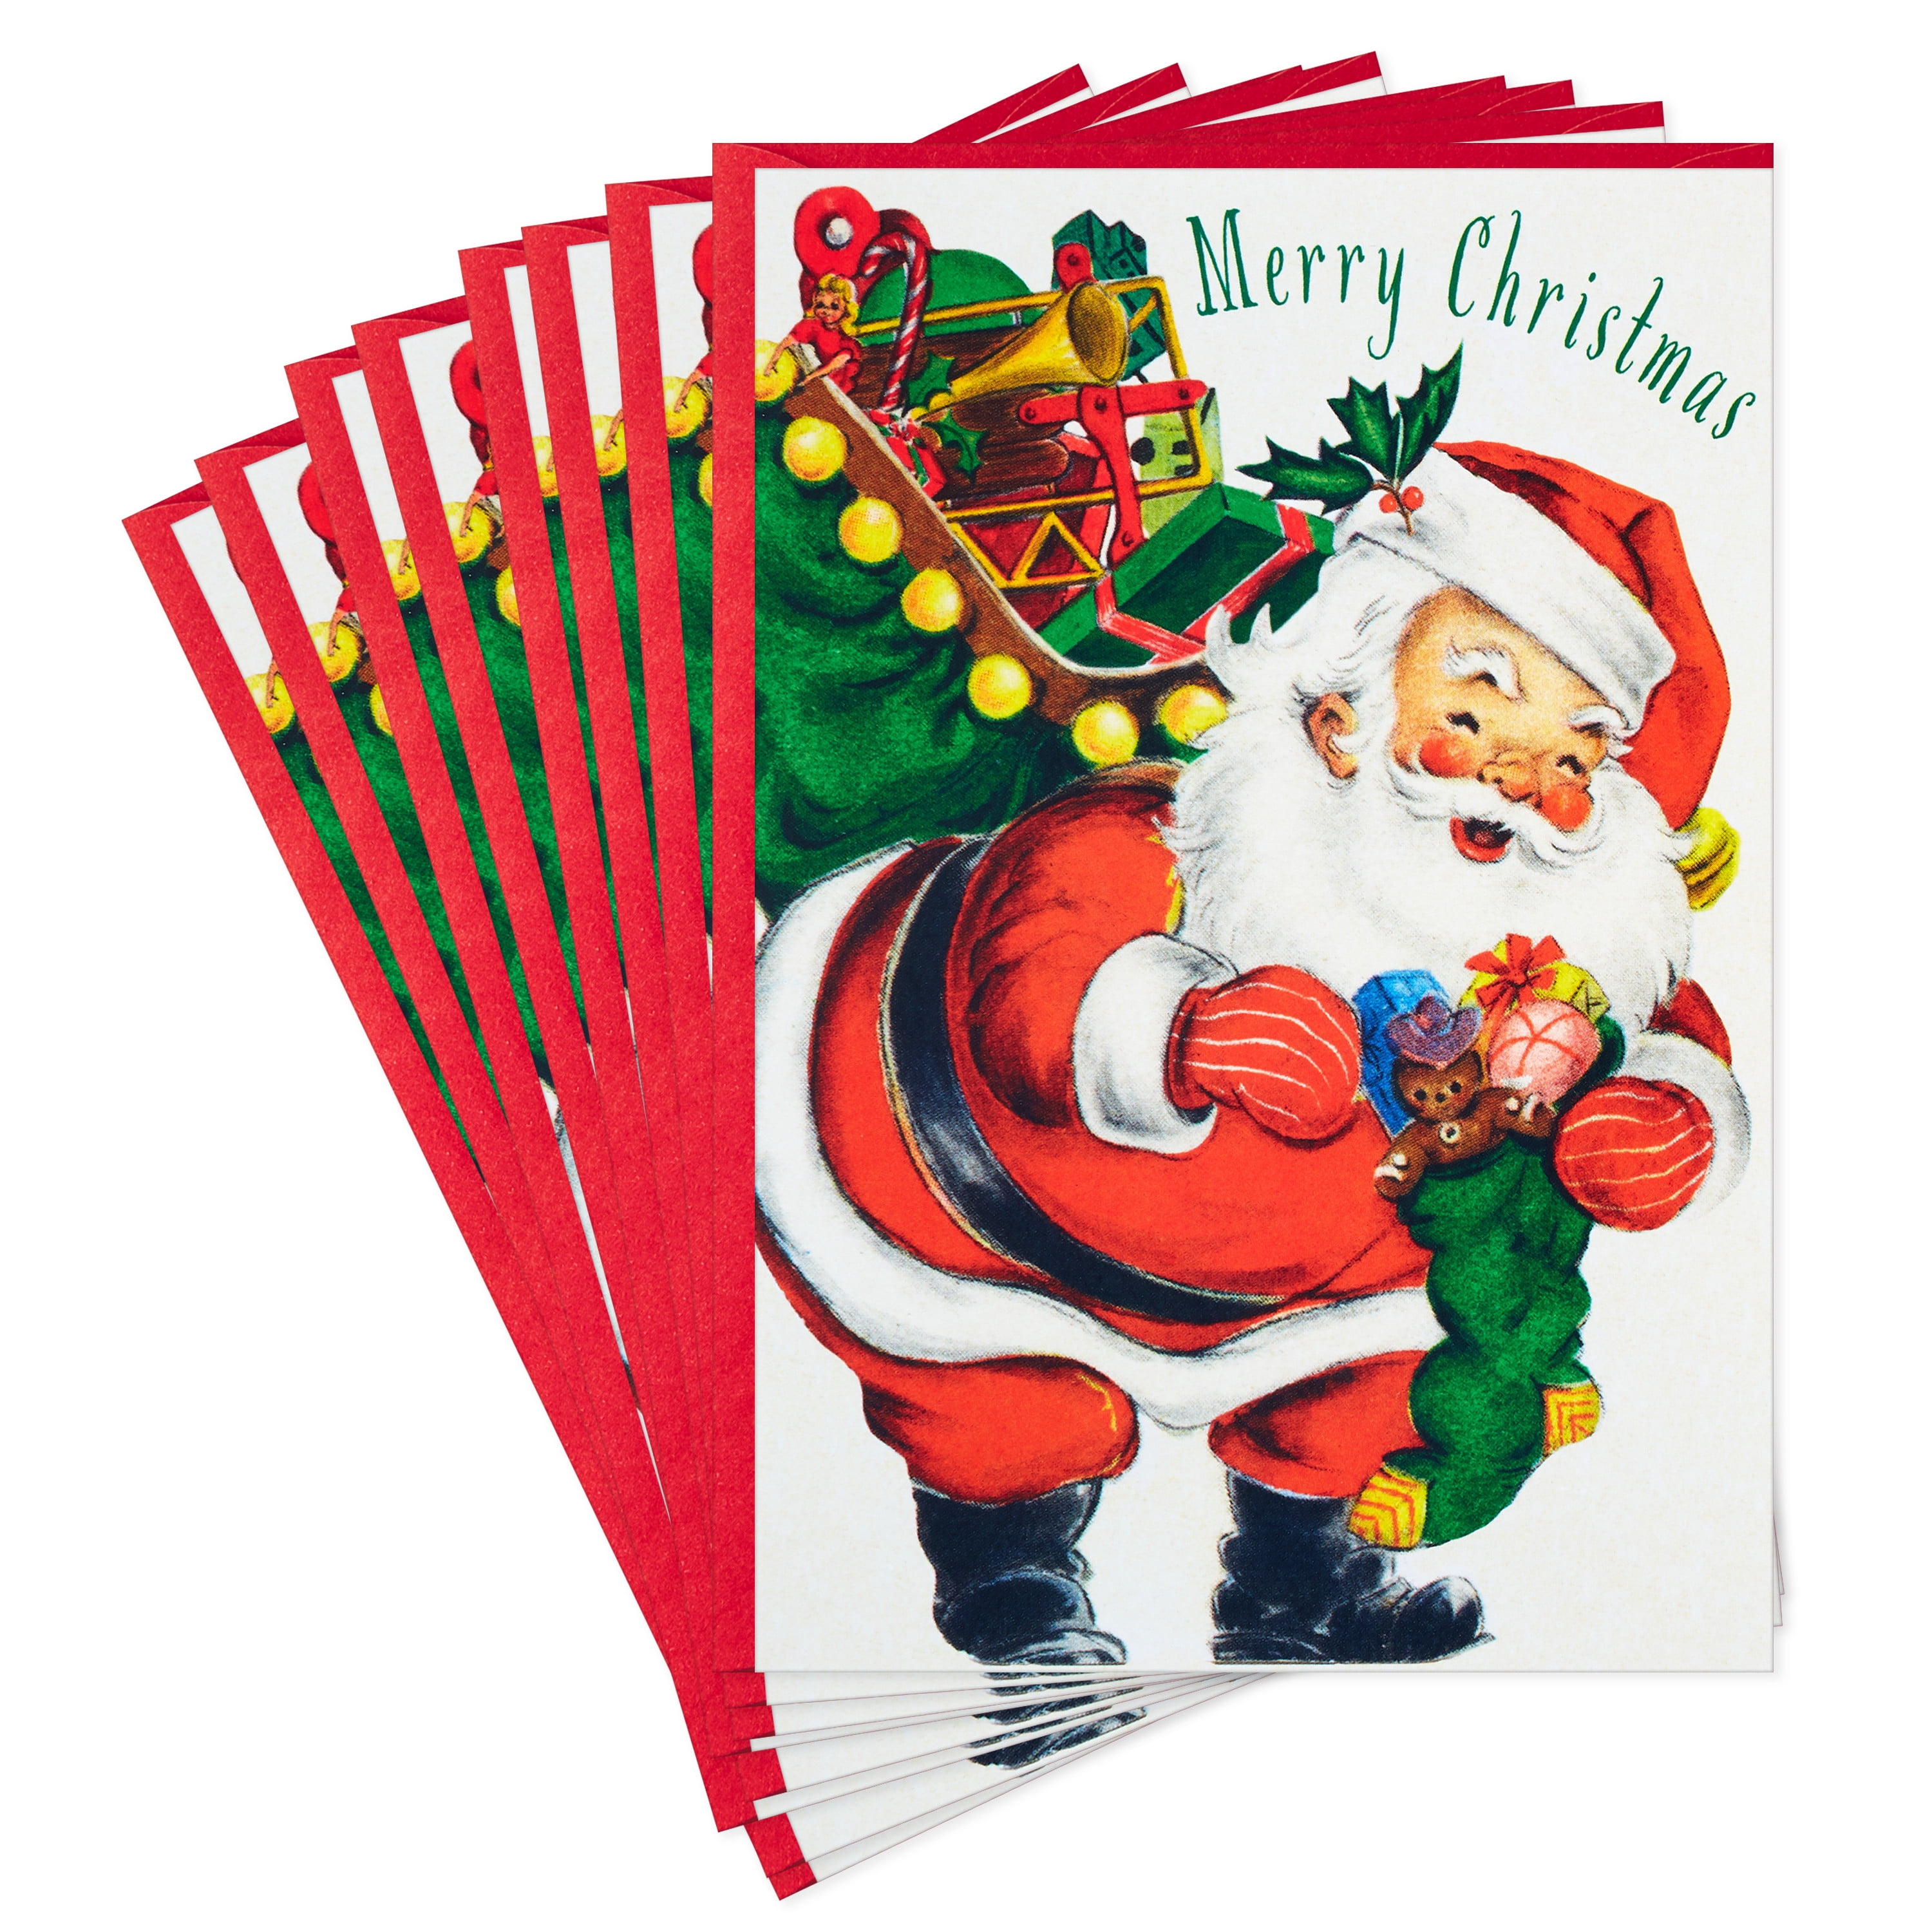 Merry Christmas Old Fashioned Santa Claus Holiday Greeting Cards